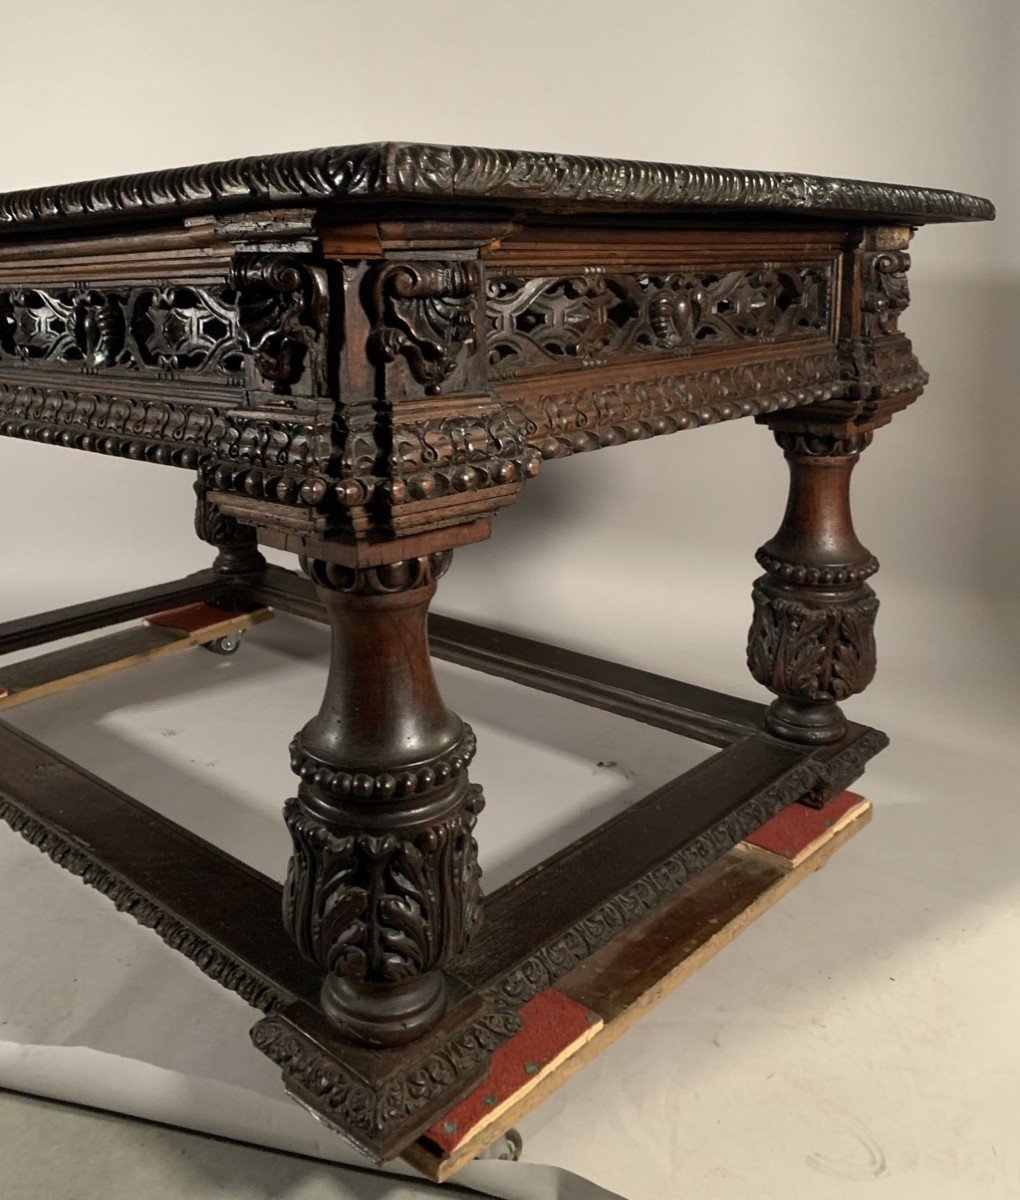 Large Carved Wooden Desk Table. Central Europe, Late 16th - Early 17th Century.-photo-1